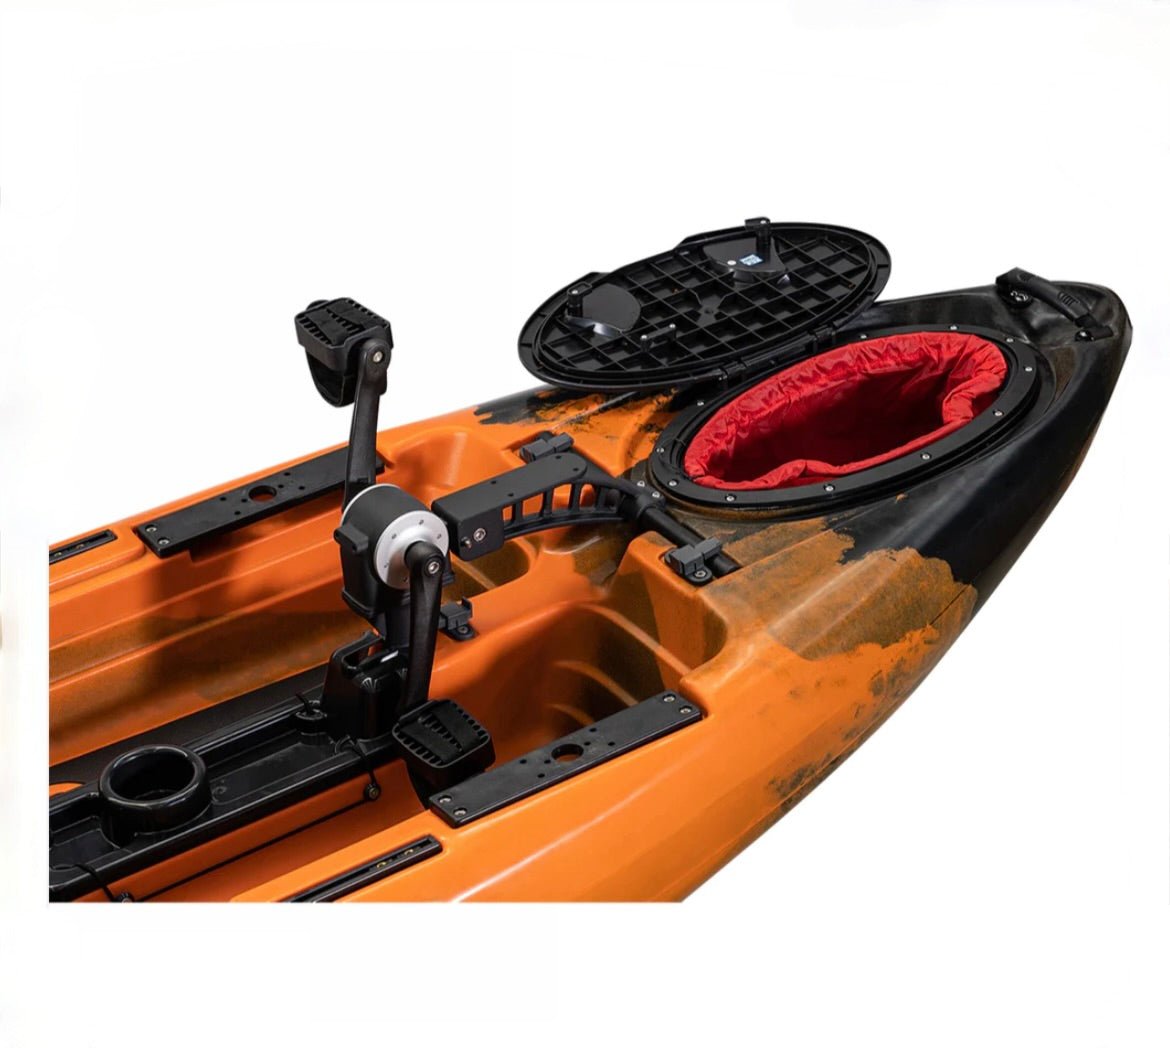 Oasis FishMaster 100 10 Foot Fishing Kayak with Pedal System – Lion Fitness